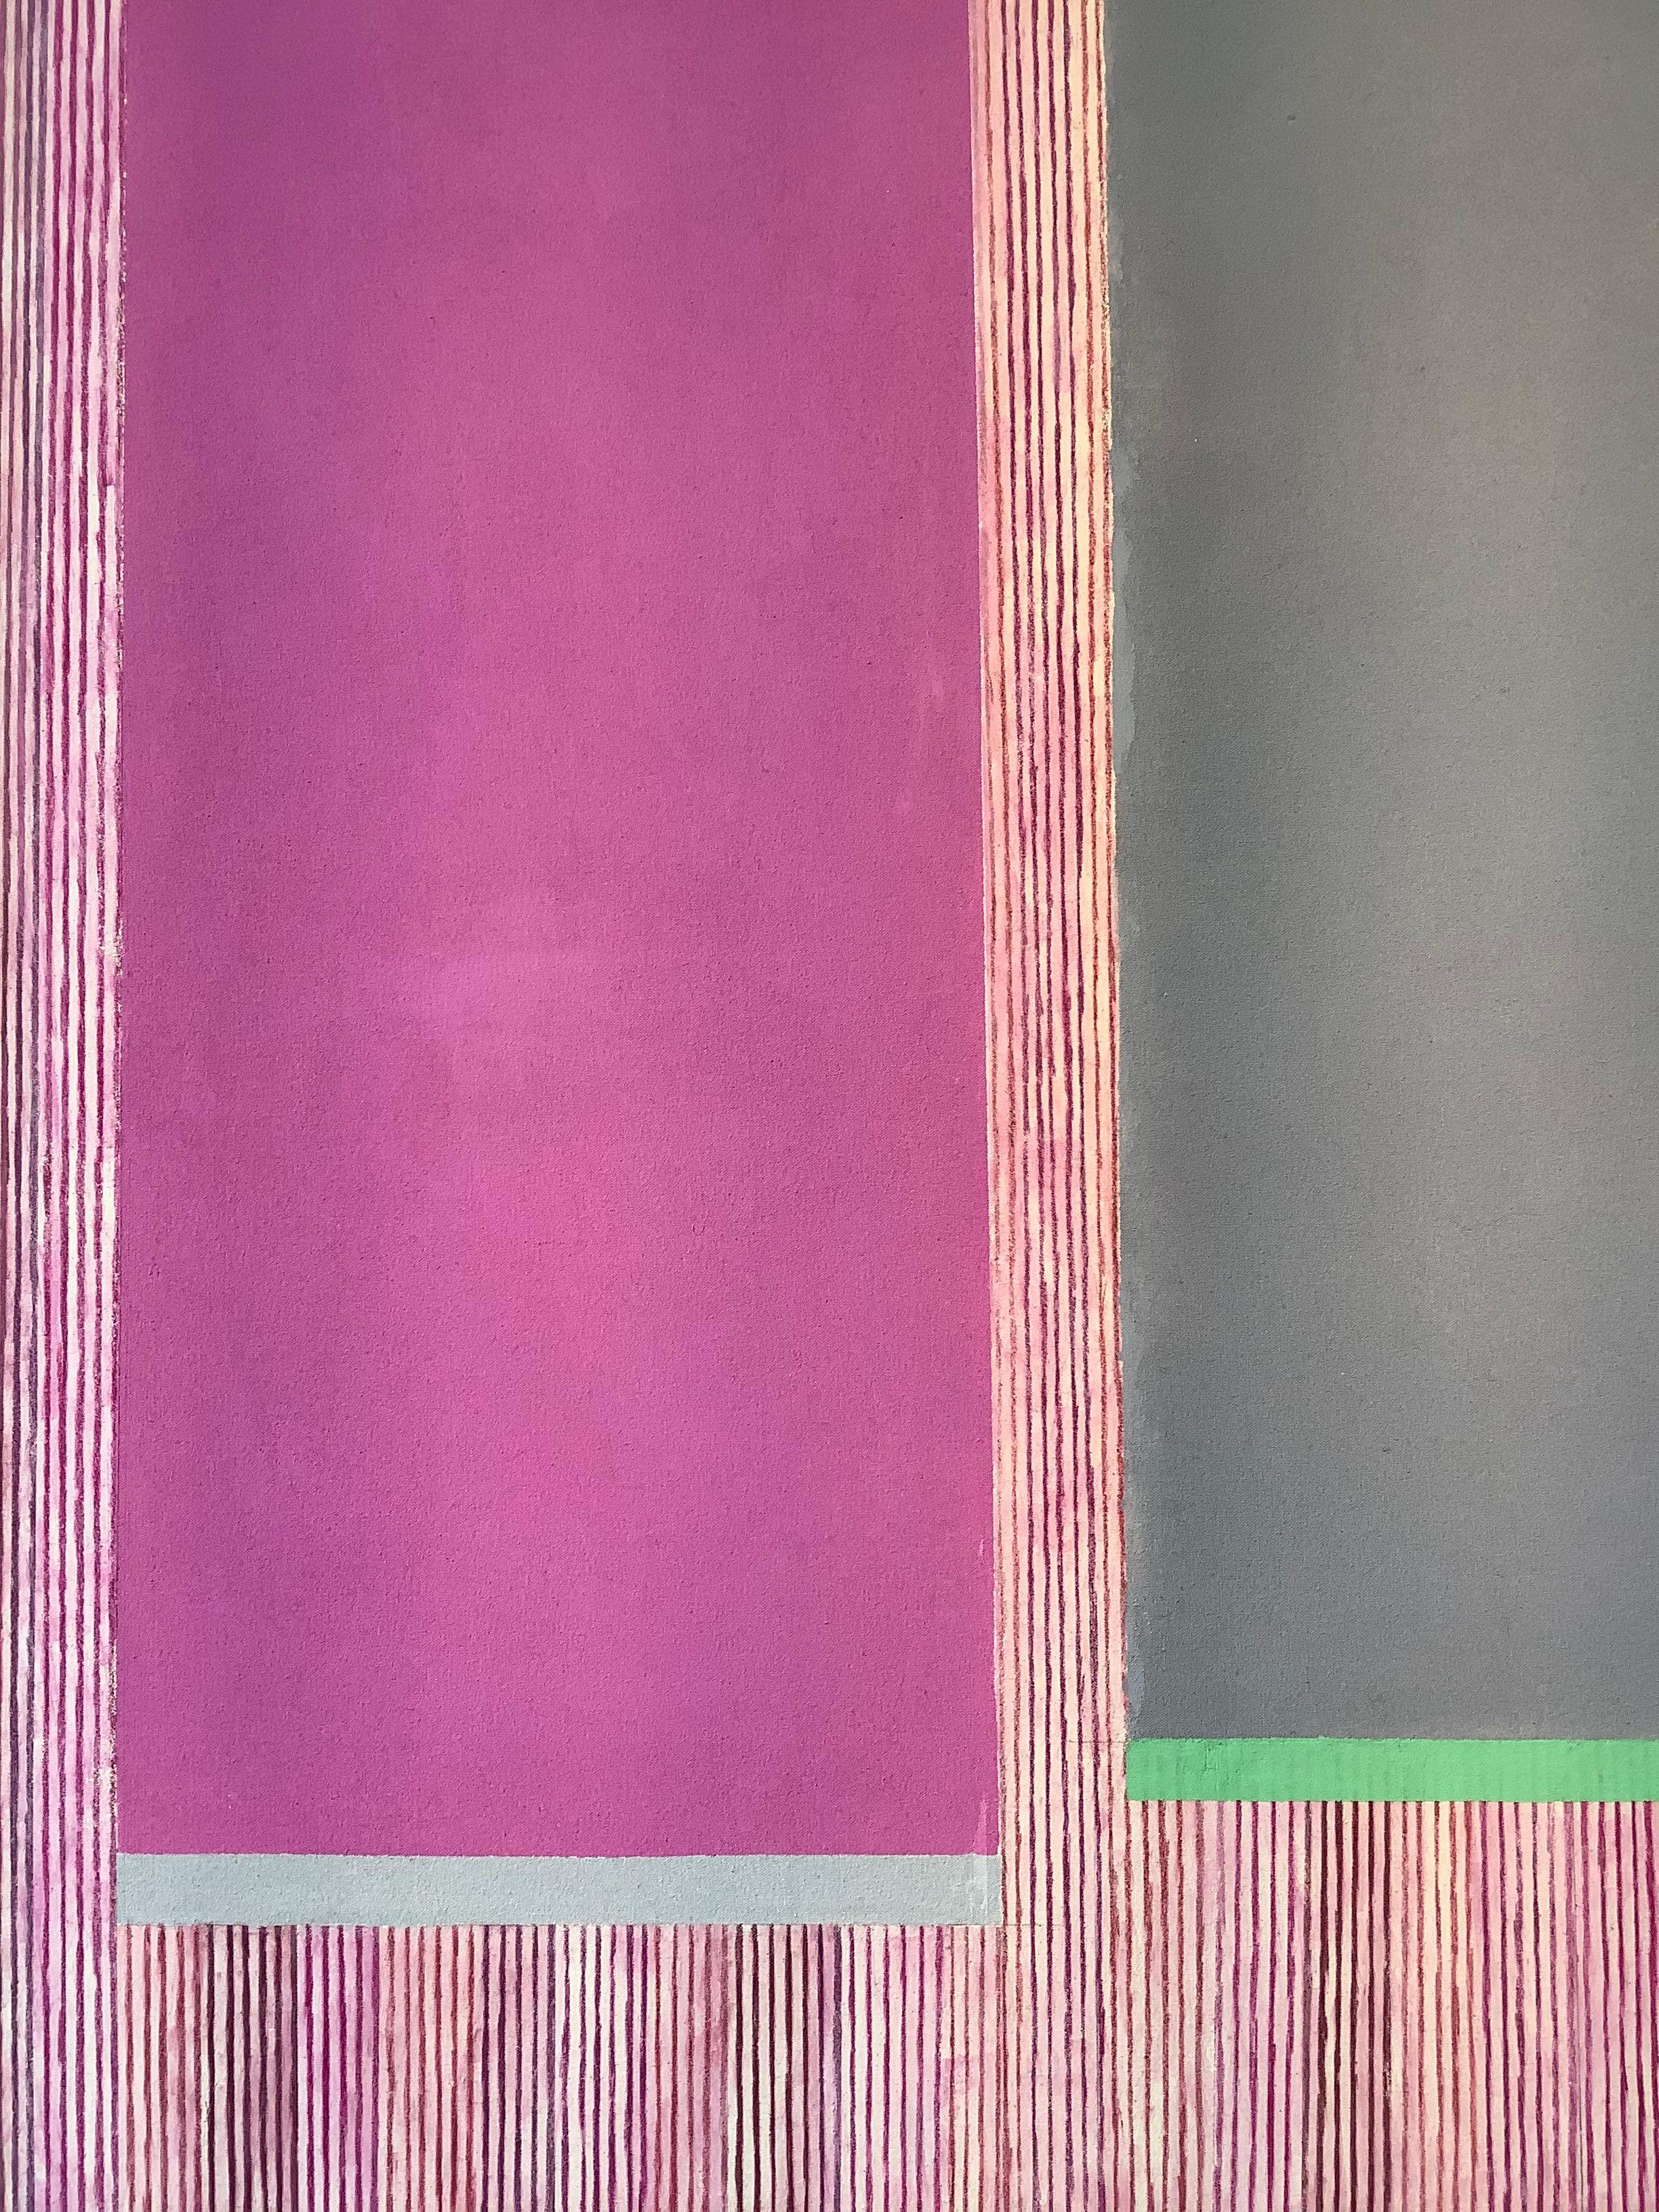 Magenta Gray B, Pink, Gray, Green, Red Stripes, Geometric Abstract Painting For Sale 3